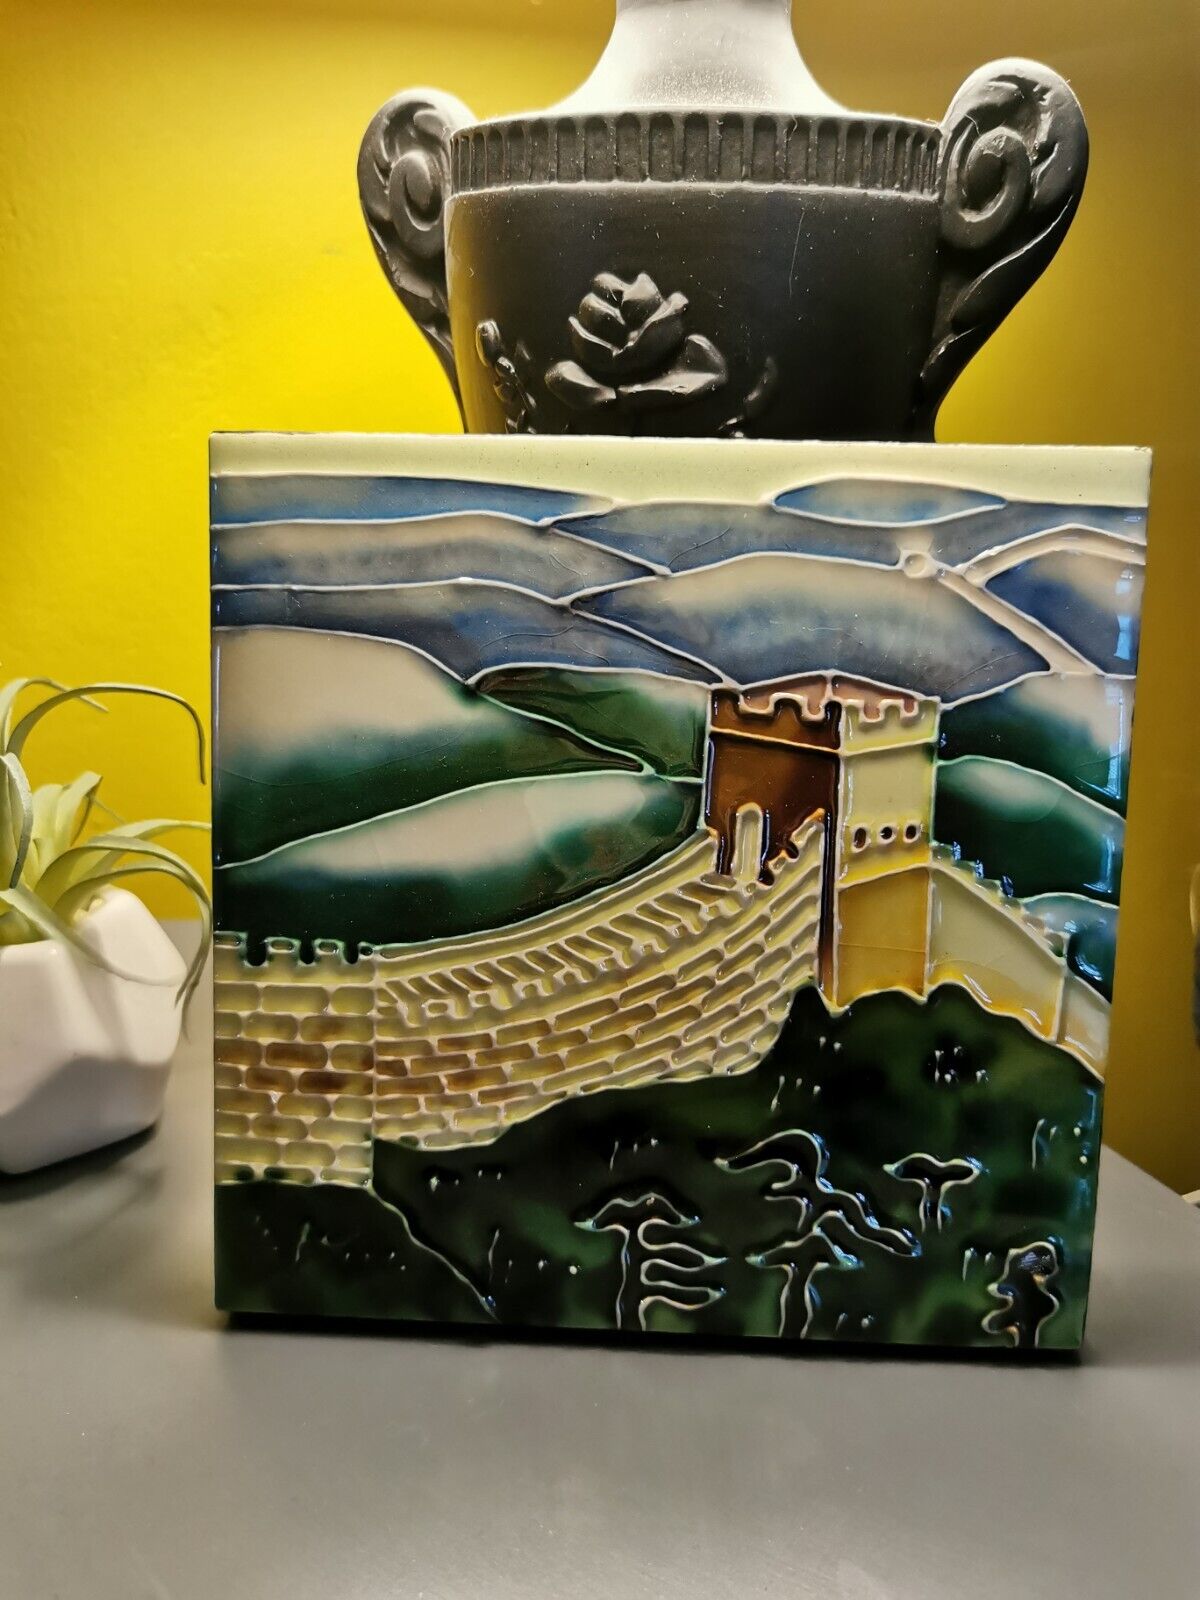 Antique Valuations: Beautiful Hand Painted Wall Tile 6 inch Square Vintage Ceramic Great Wall China